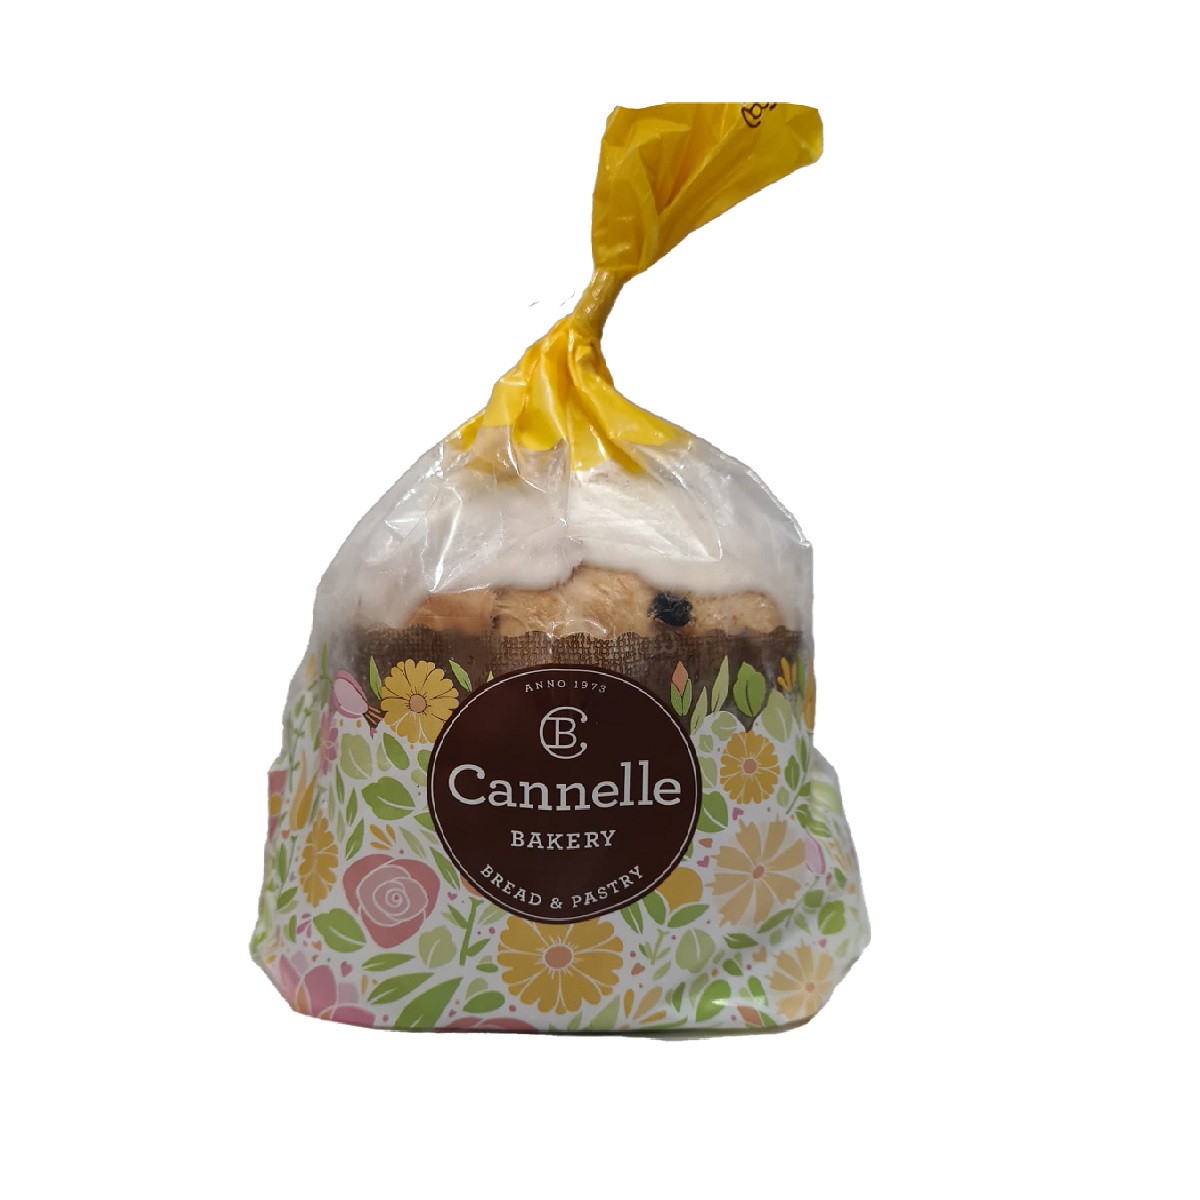 Cannelle Easter Cake 300g